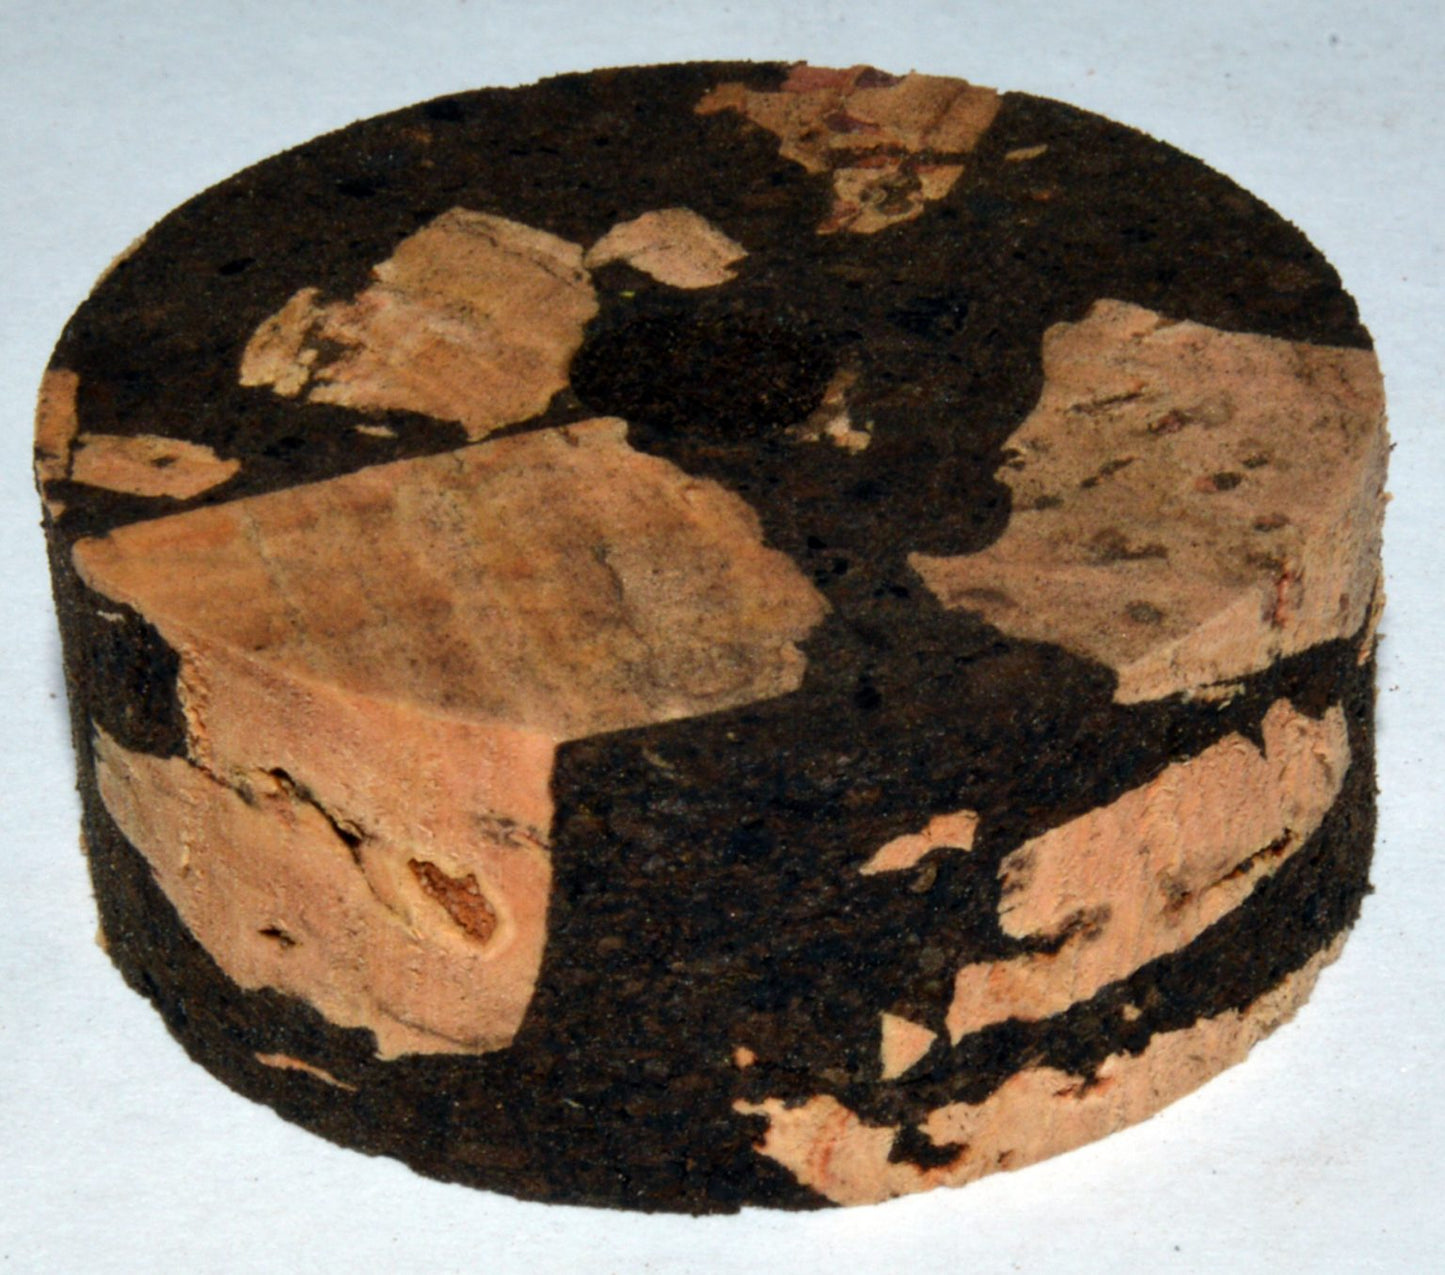  Cork4us Cork rings Burl Mix Black  1 1/4" x 1/2" (32mm x 13mm)  with hole 1/4" (6mm)